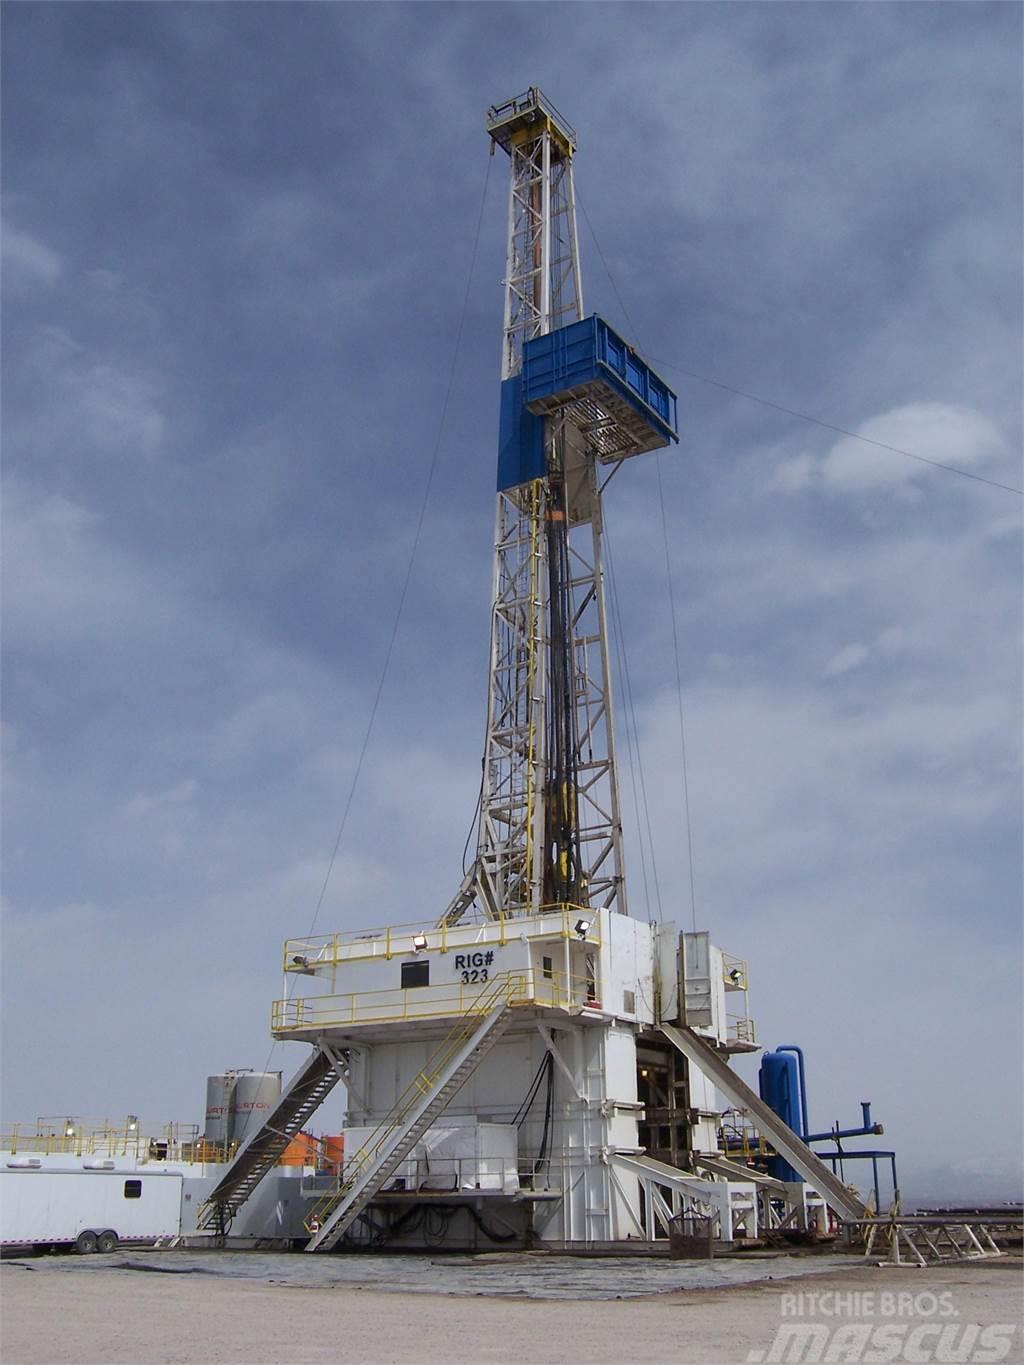 National 110 UE Complete Rig #323 Surface drill rigs